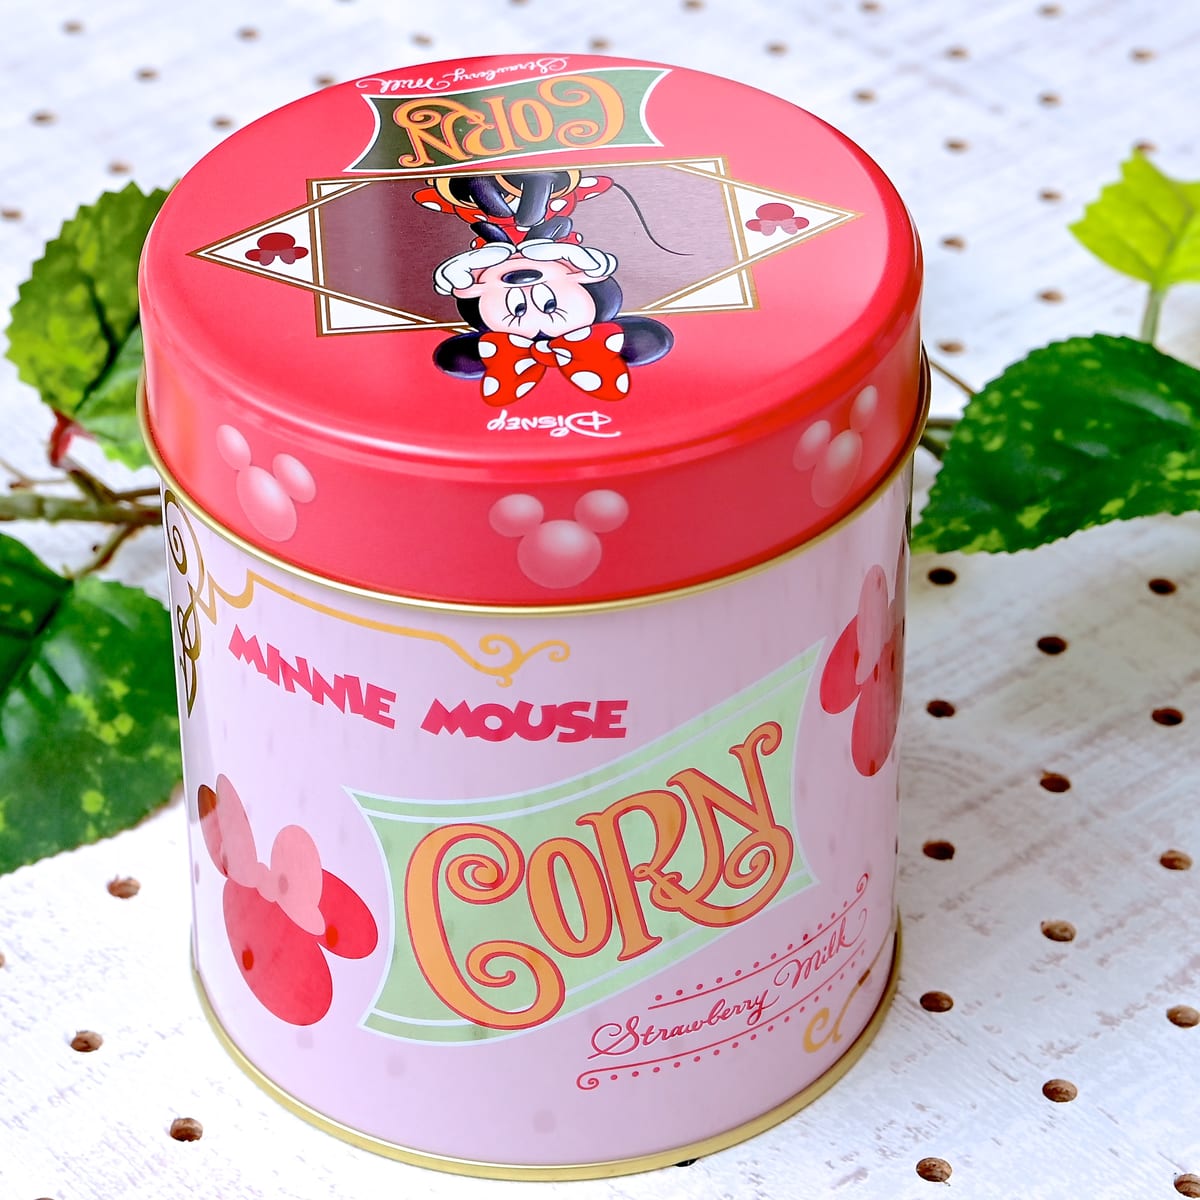 Disney SWEETS COLLECTION by 東京ばな奈『ミニーマウス/コーン いちごミルク味』缶バックデザイン